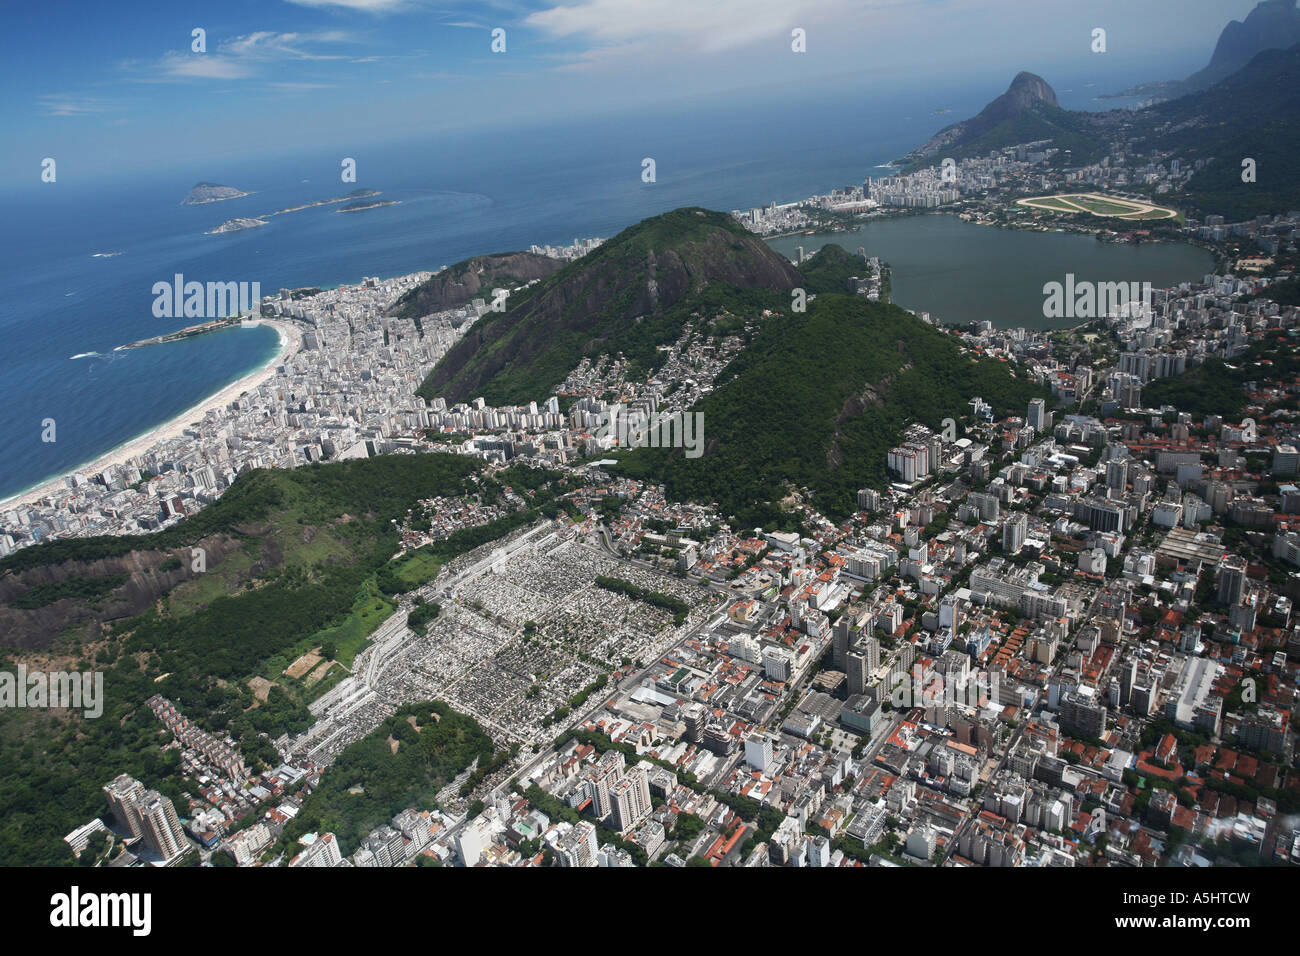 Aerial landscape view from helicopter of Rio de Janeiro city coastline with Lagoa lake, Ipanema and Copacobana beach Stock Photo